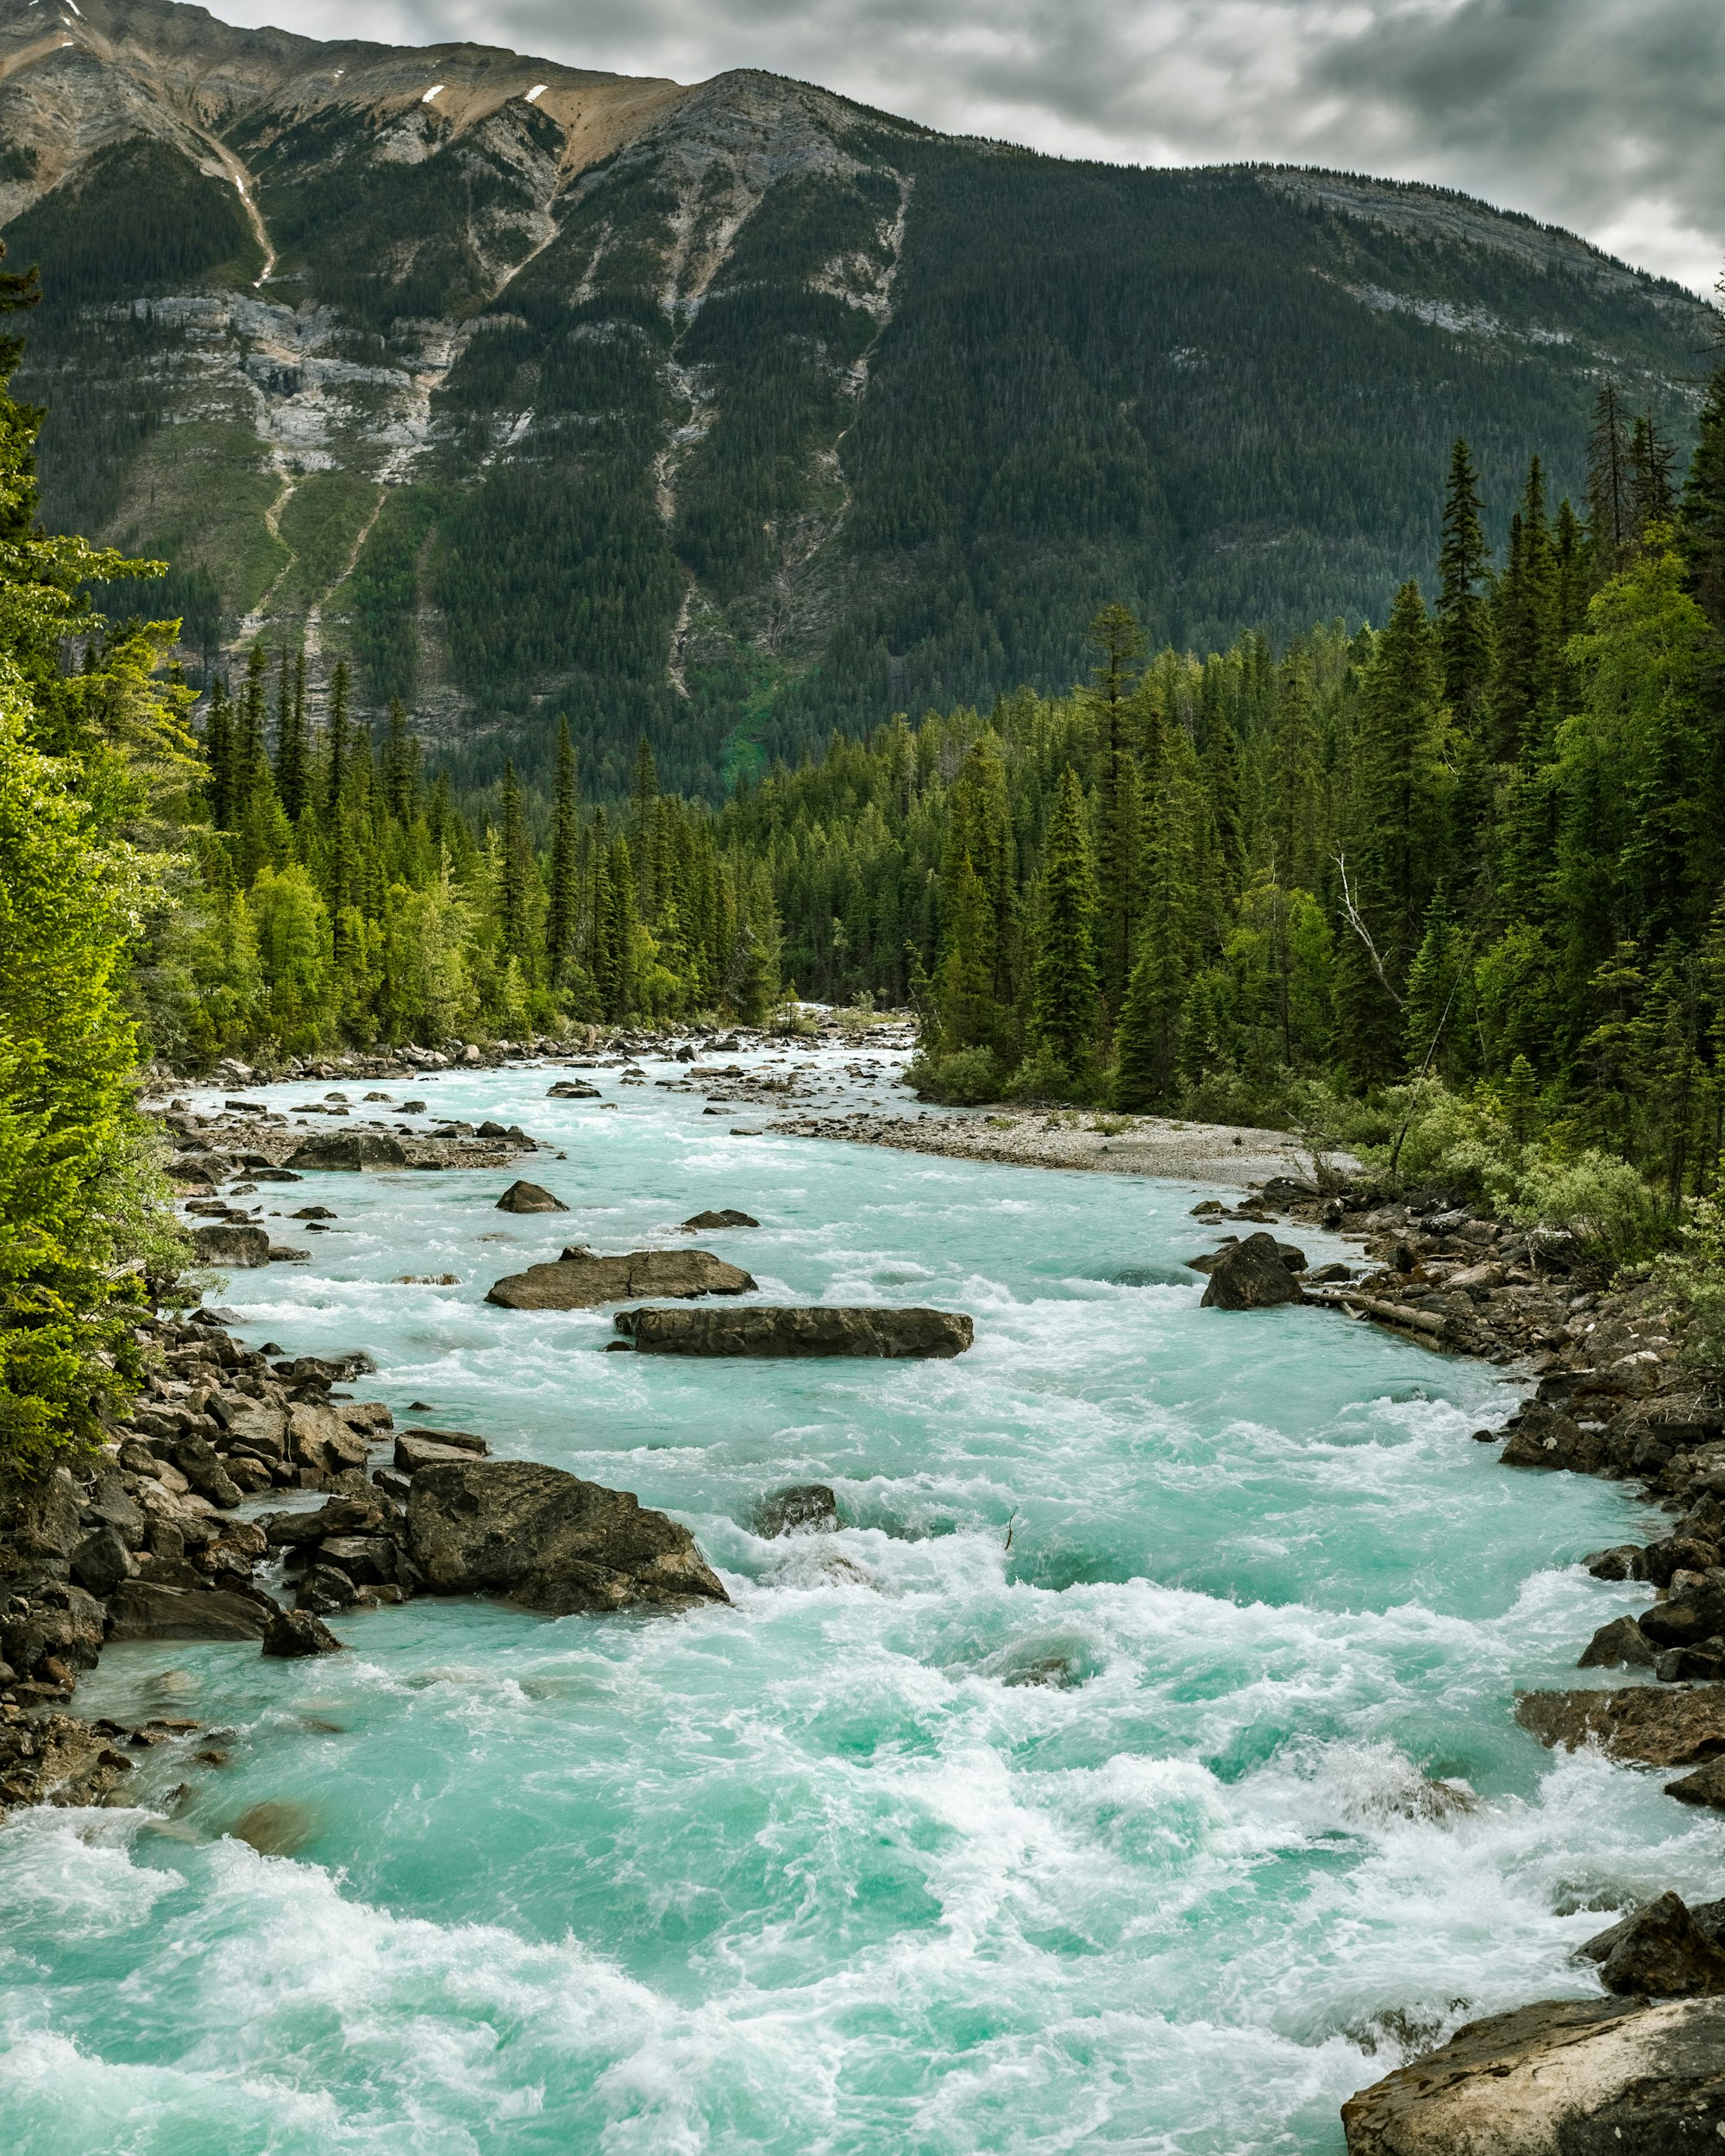 The raging Yoho River in Yoho National Park, British Columbia. This river was incredibly loud, and it wasn't until halfway through my shooting that I realised if a bear was behind me... I would have had no idea haha!